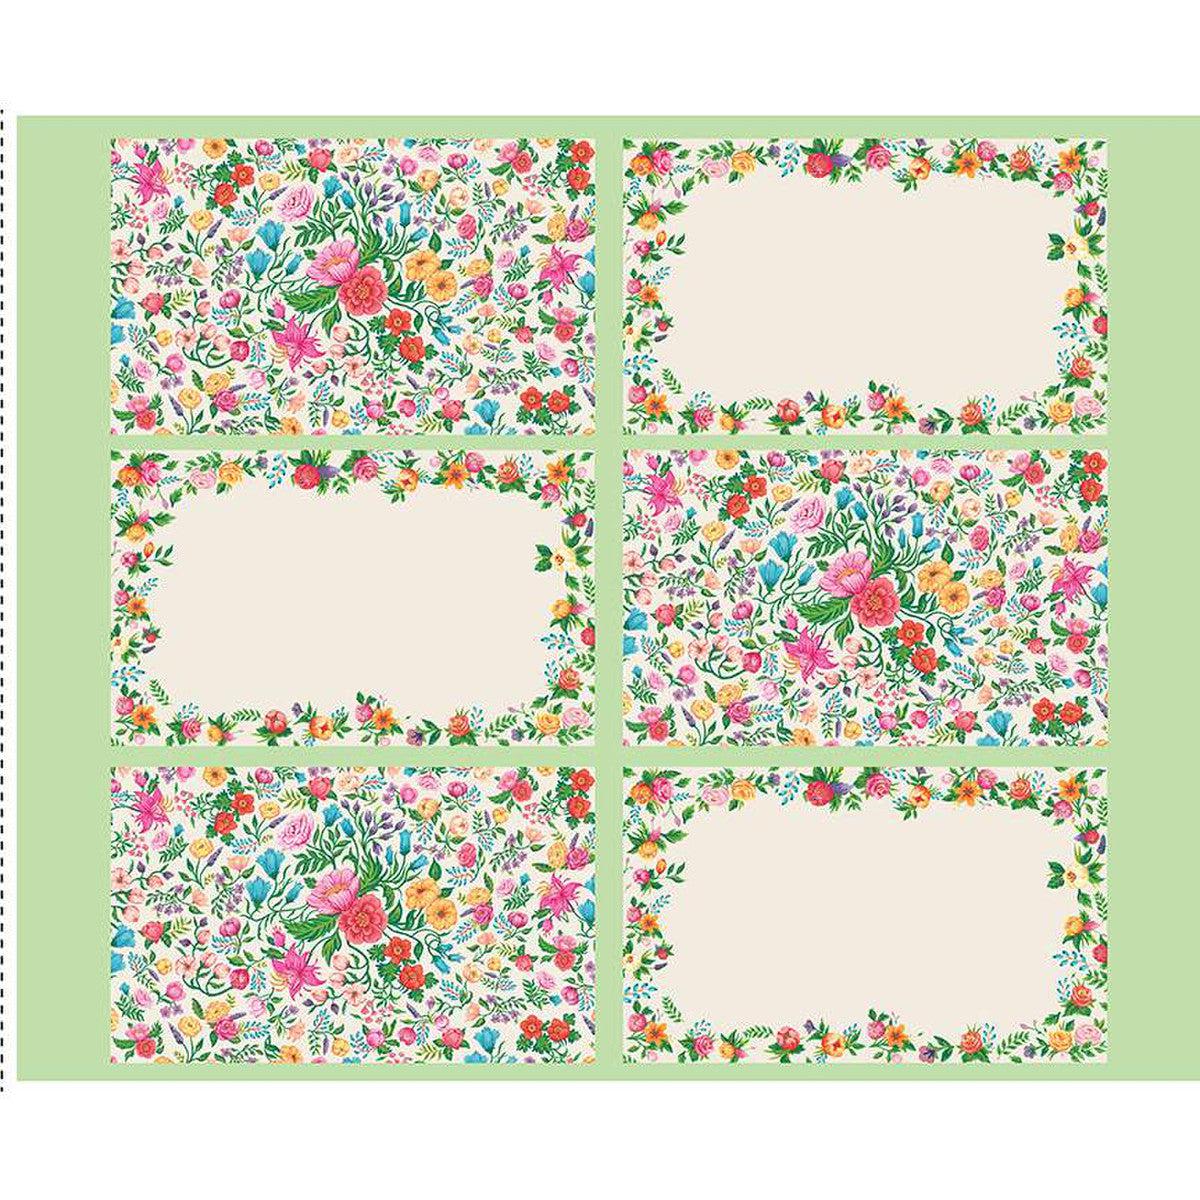 Monthly Placemats 2 August Green Floral Placemat Panel 35 1/2"